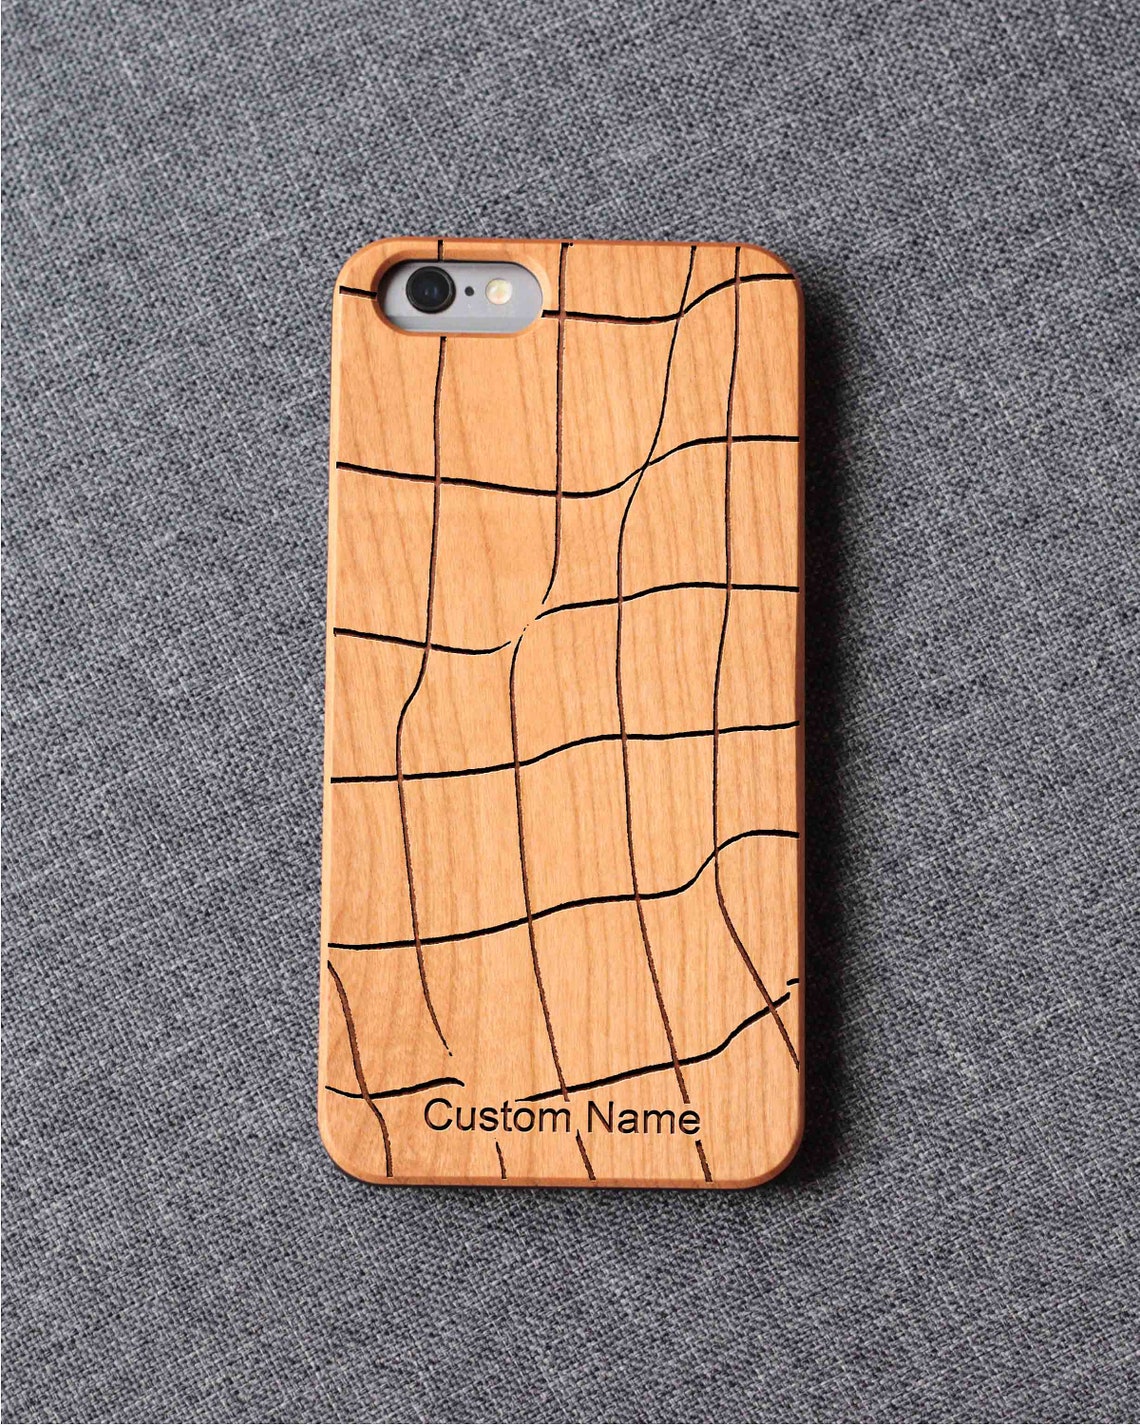 3D Geometry iPhone case for 13 mini 11 X wood iphone case iPhone 12 wood case iPhone 13 pro max, iphone 12 case